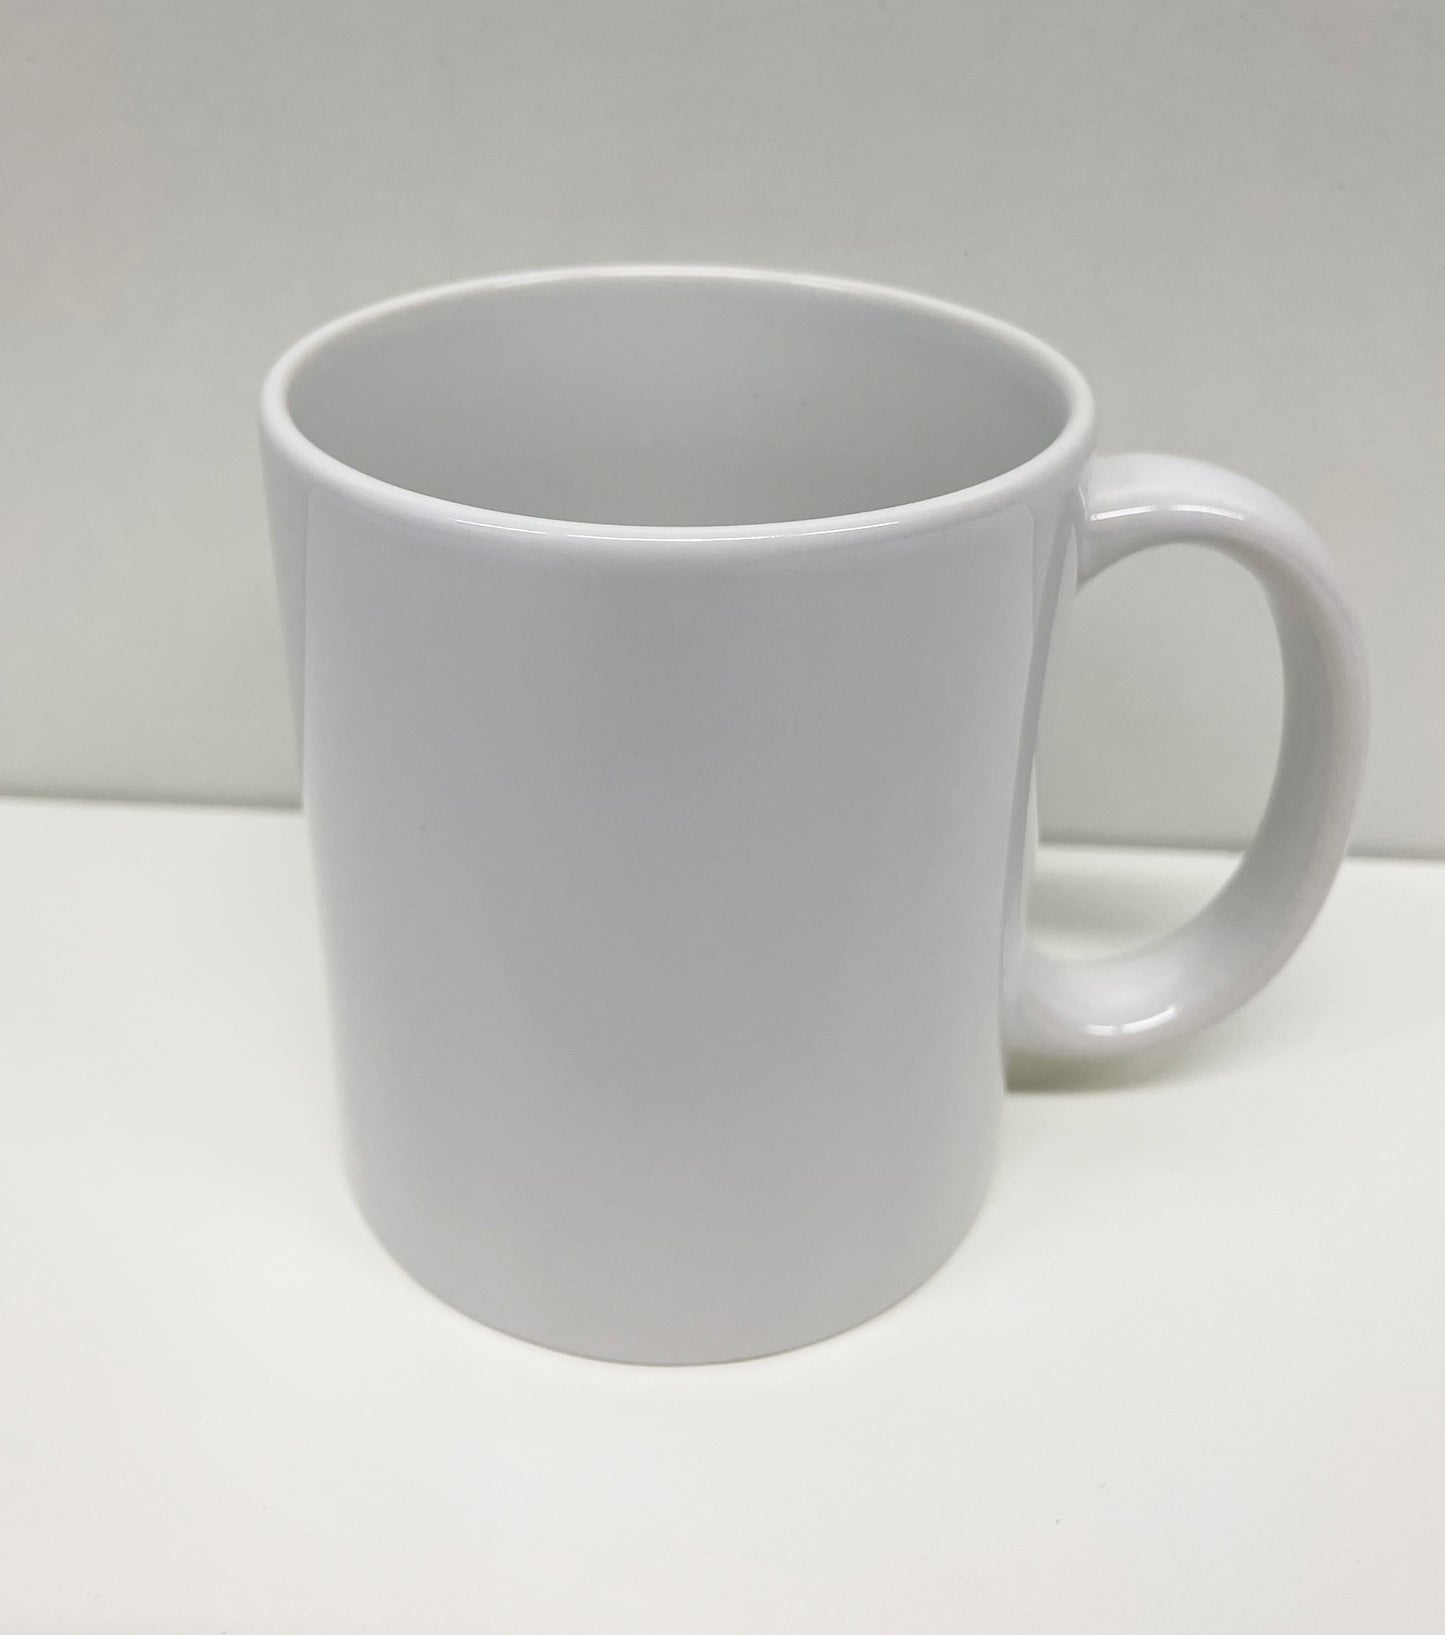 1440 cups for sublimation printing / "SUPER WHITE" (each €1.29)